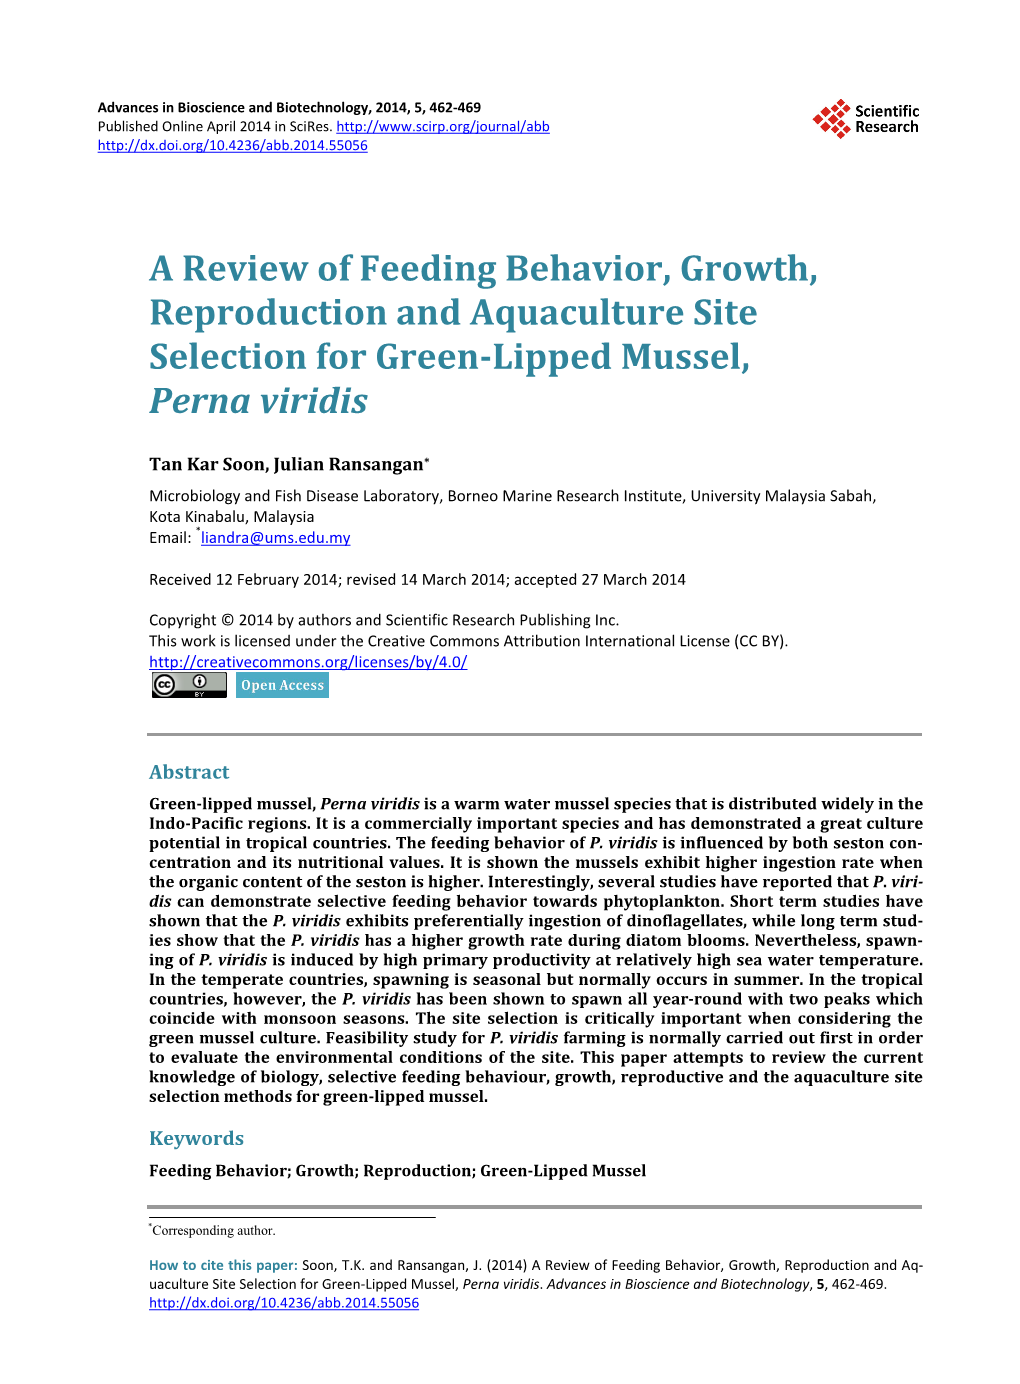 A Review of Feeding Behavior, Growth, Reproduction and Aquaculture Site Selection for Green-Lipped Mussel, Perna Viridis